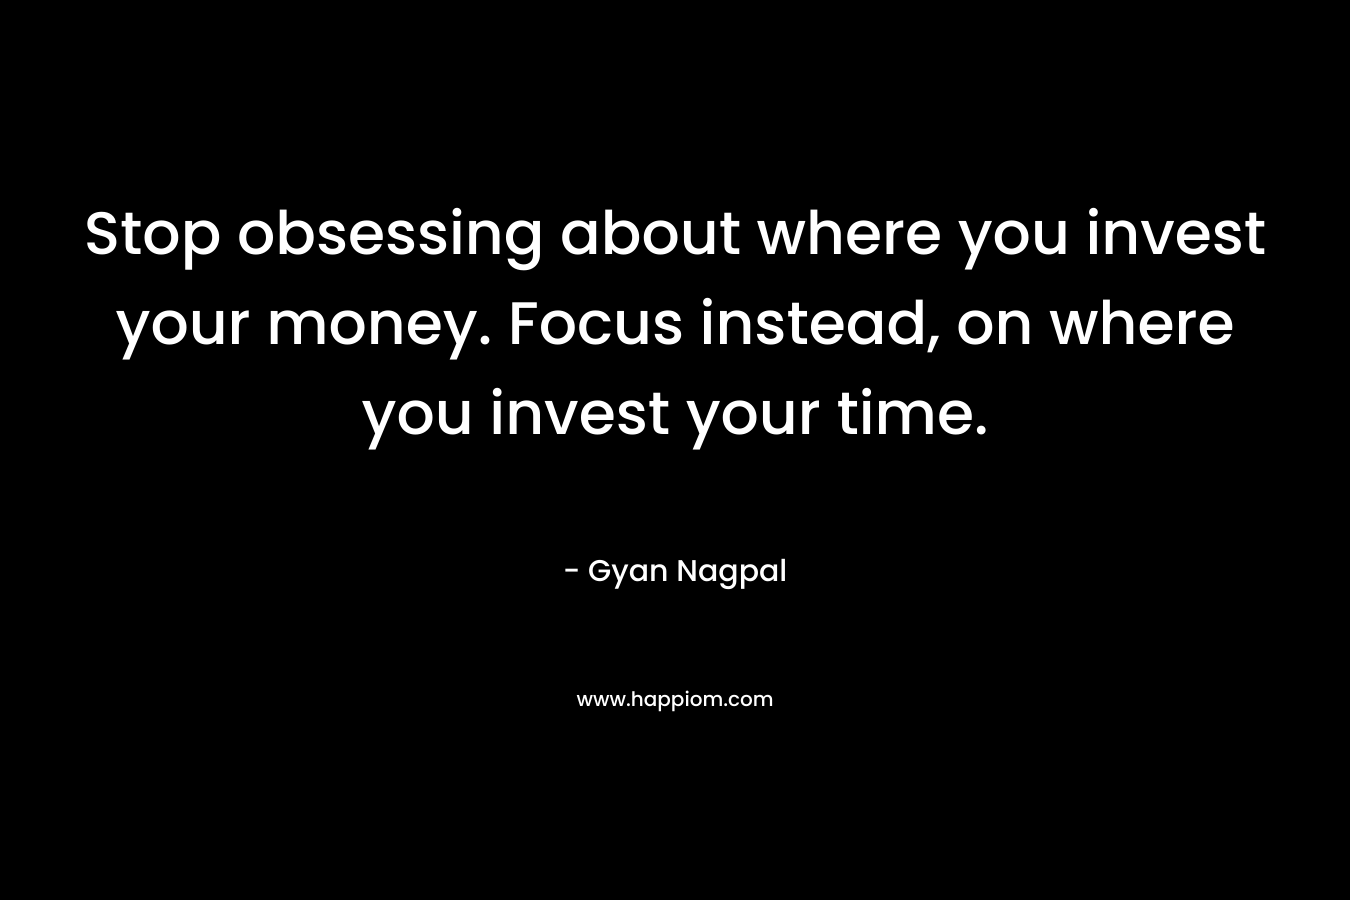 Stop obsessing about where you invest your money. Focus instead, on where you invest your time. – Gyan Nagpal